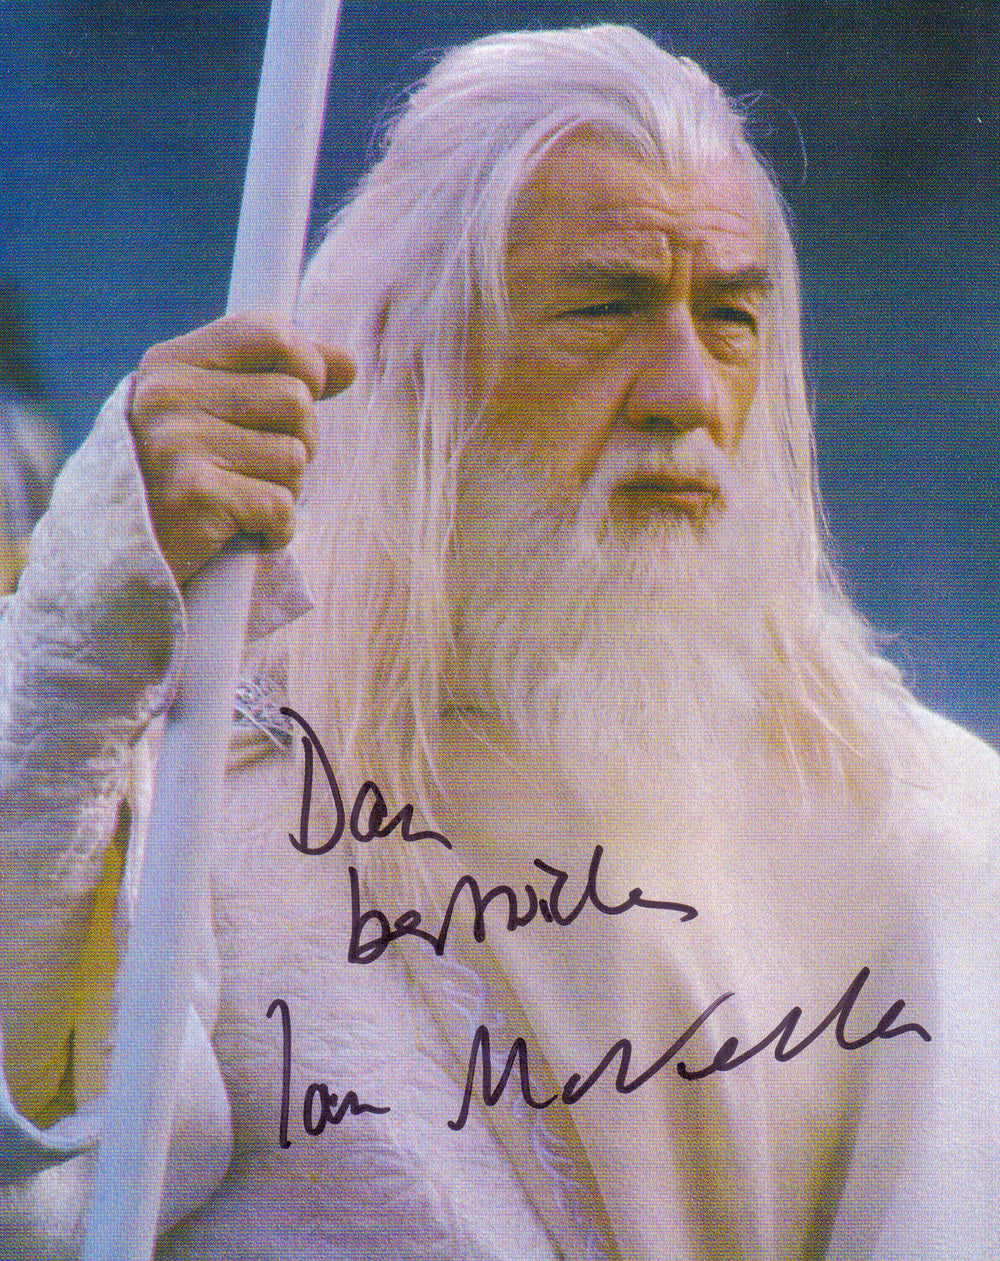 Ian McKellen as Gandalf the White in The Lord of the Rings: The Return of the King Signed 8x10 Photo